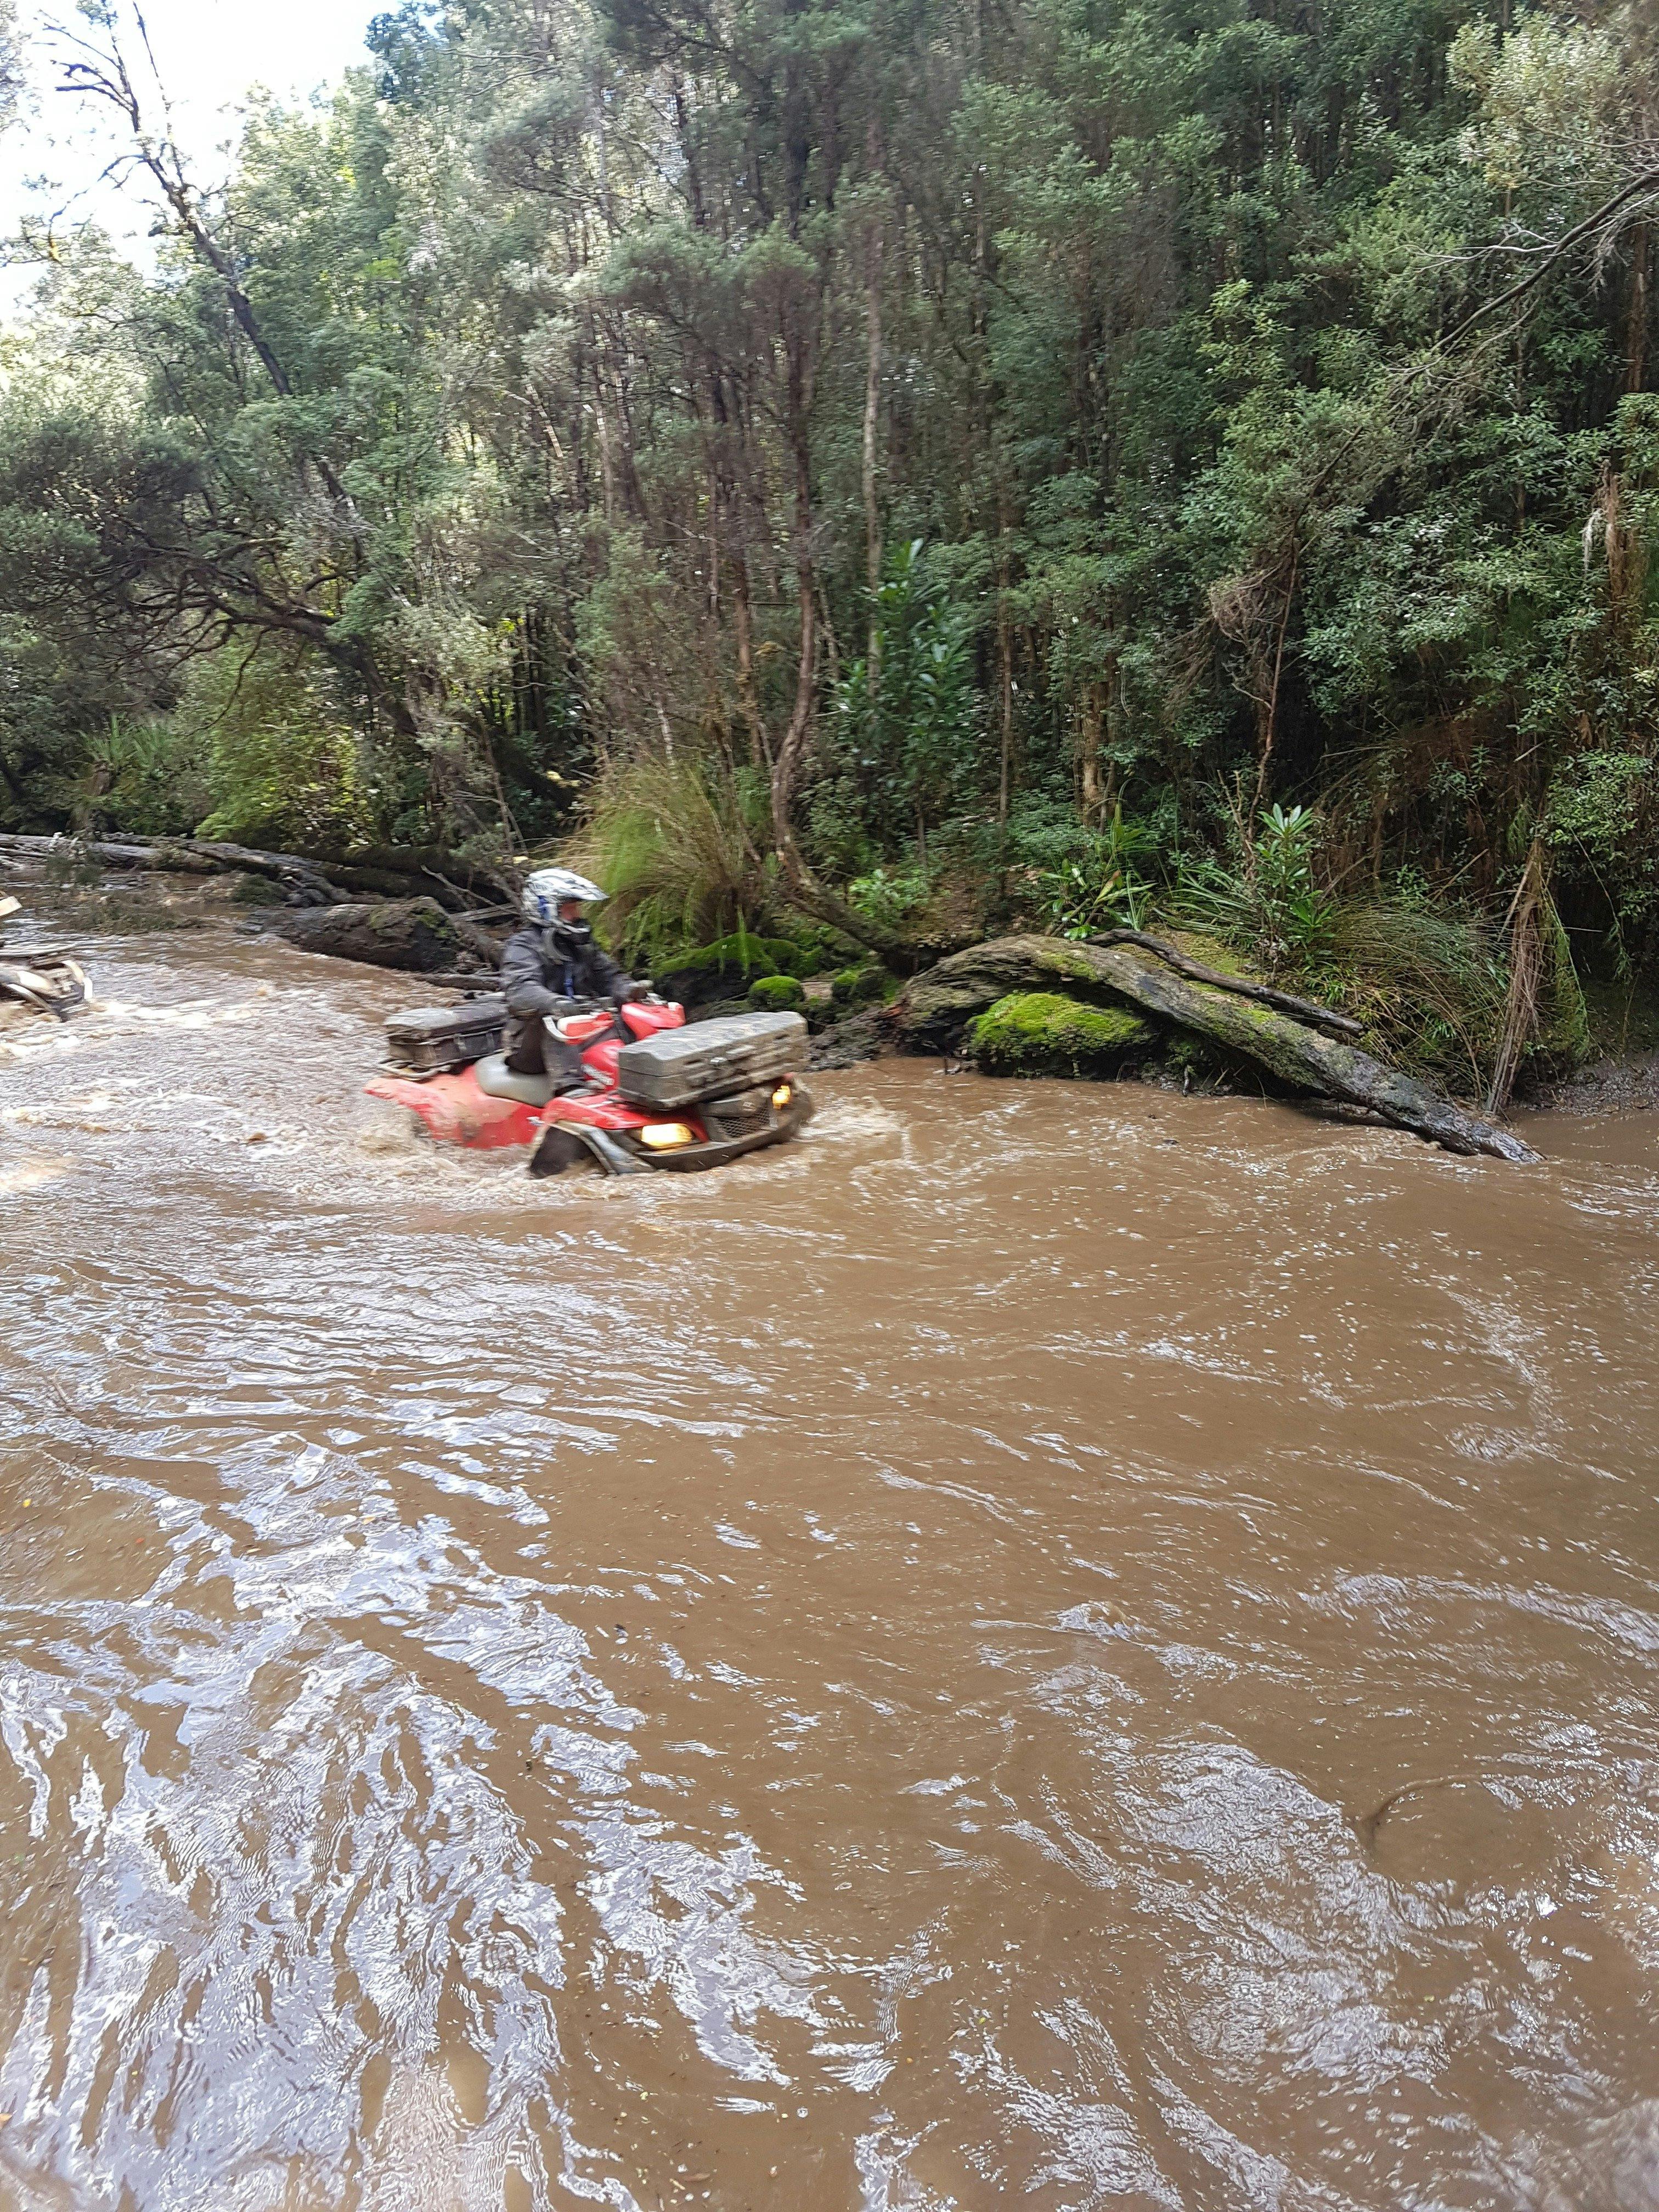 Tarkine Quad and Side by Side Adventures